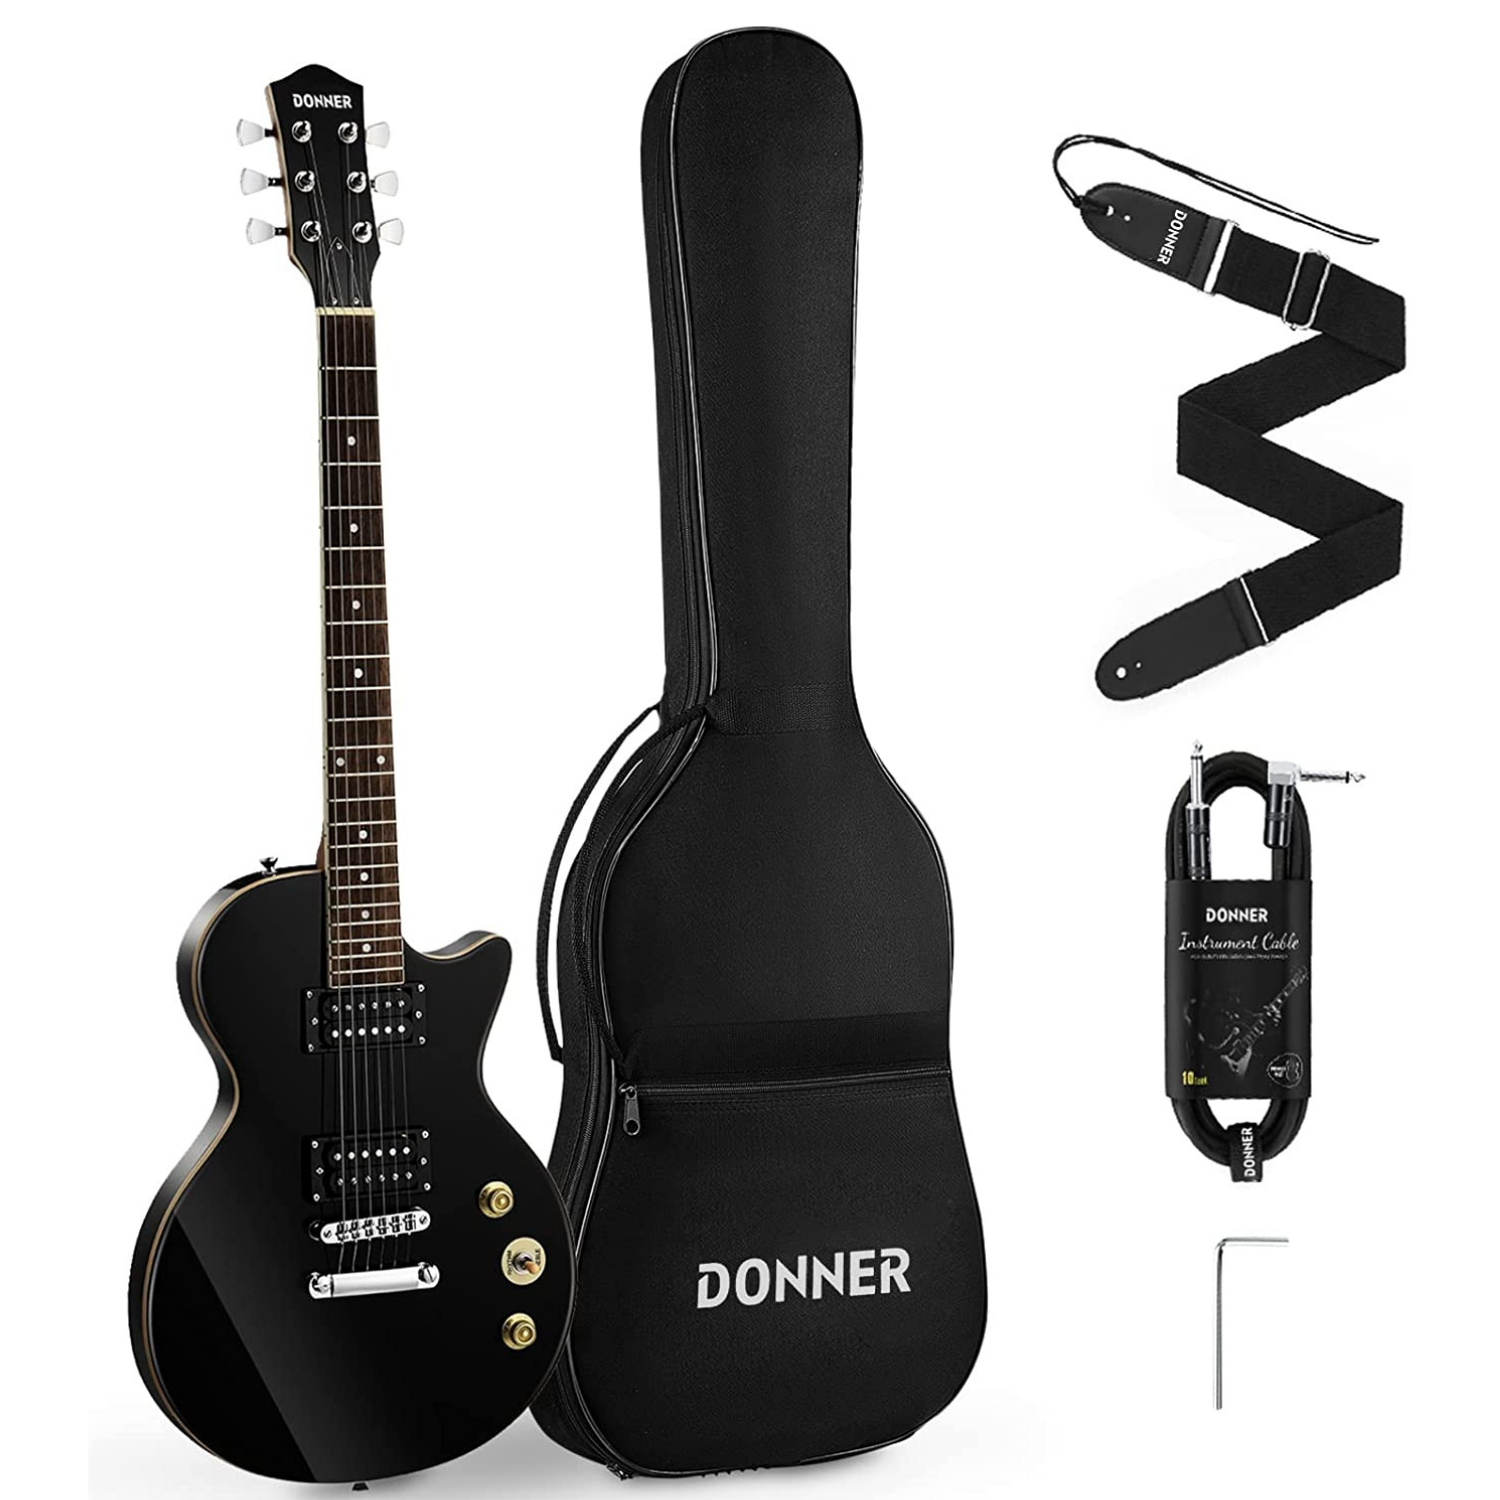 

Donner DLP-124 Full Size LP 39-inch Electric Guitar Kit Solid Body H-H Pickup